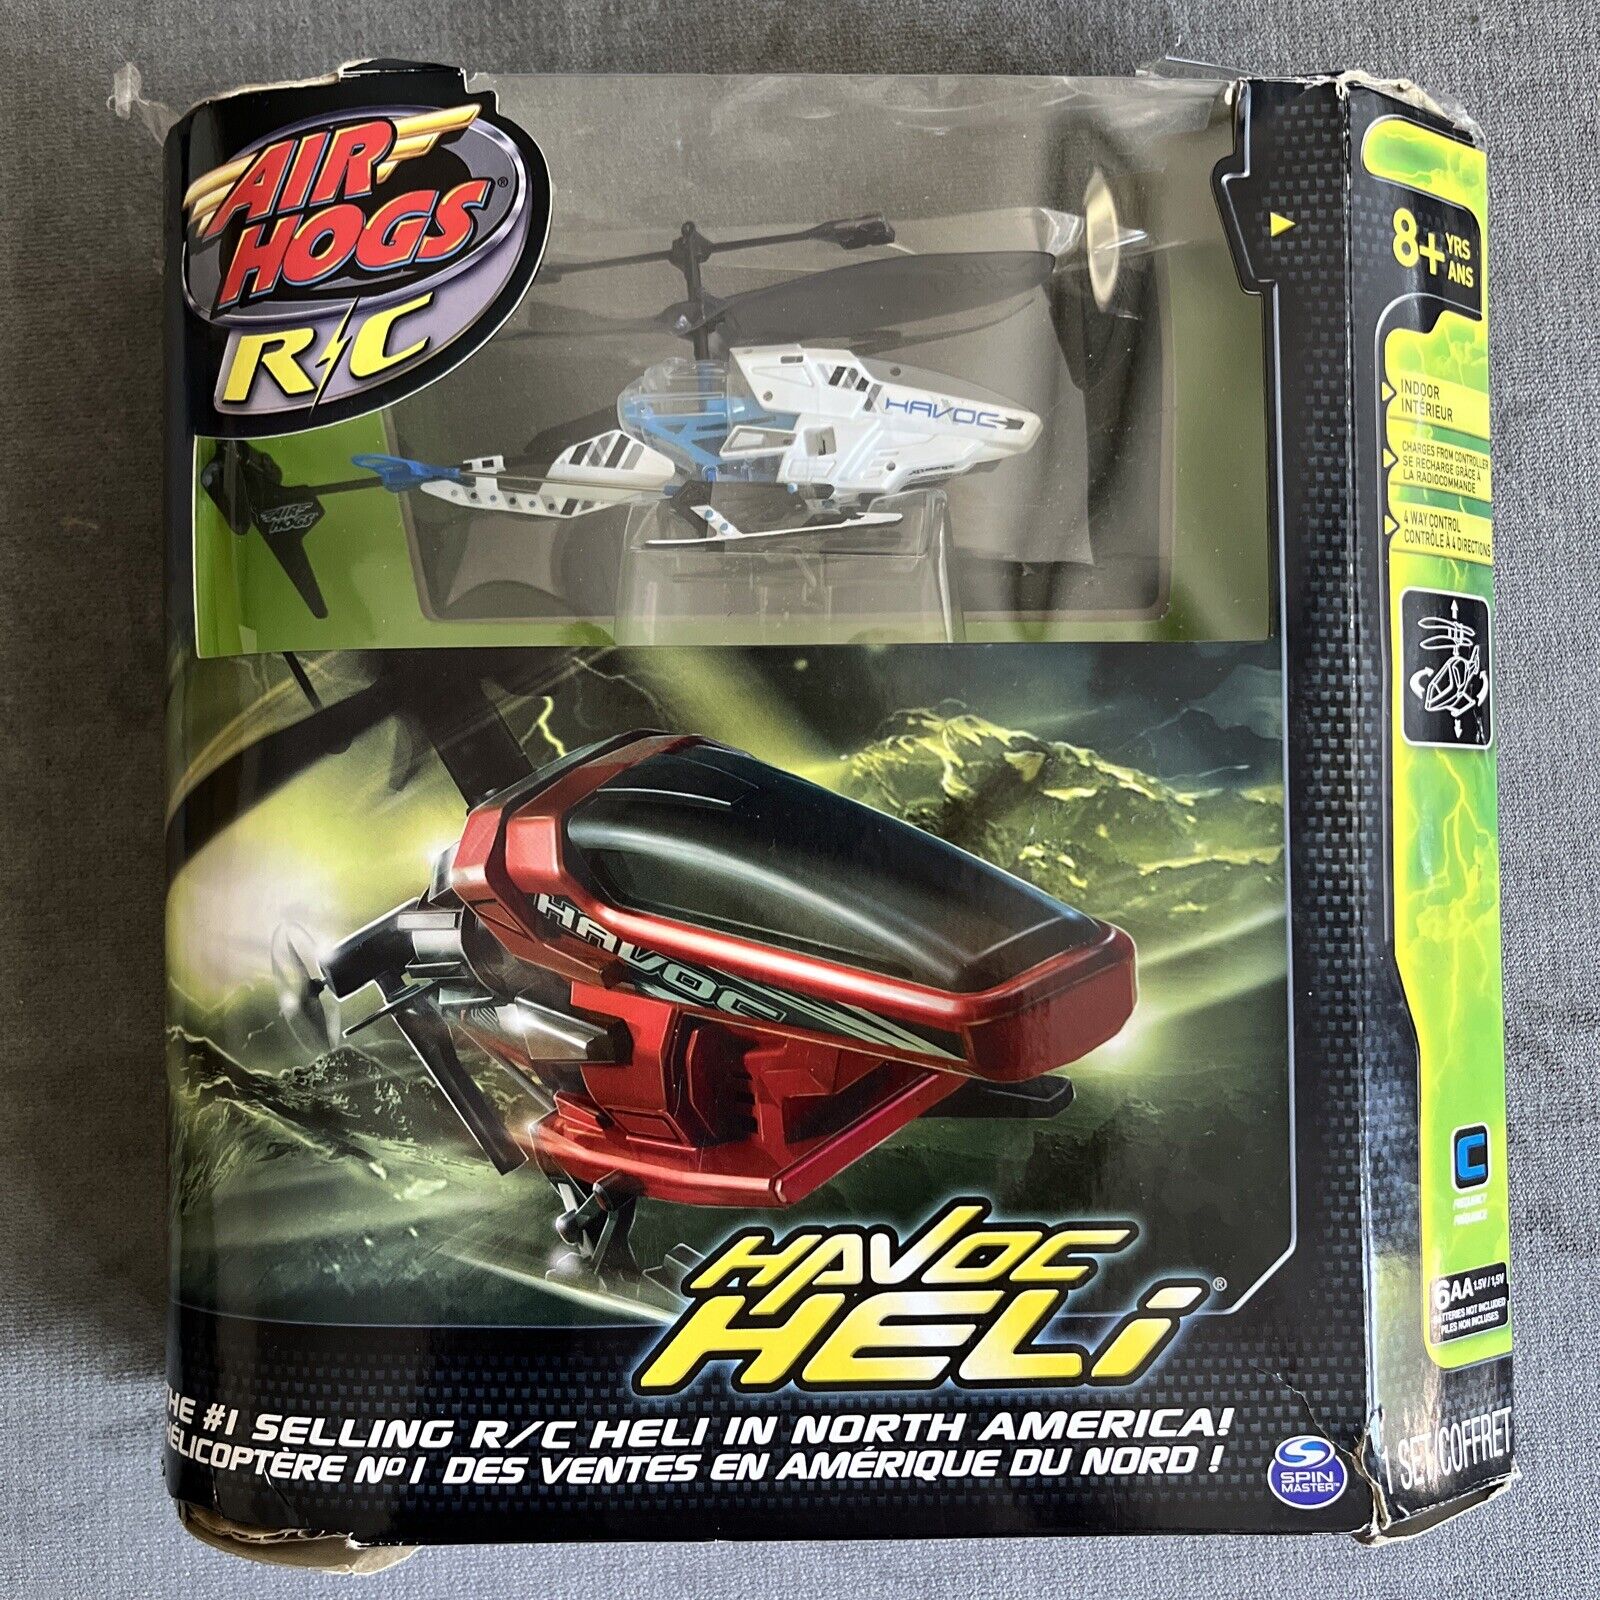 NEW* Air Hogs Havoc Heli RC Remote Control 4 Ways Helicopter Indoor Spin Master